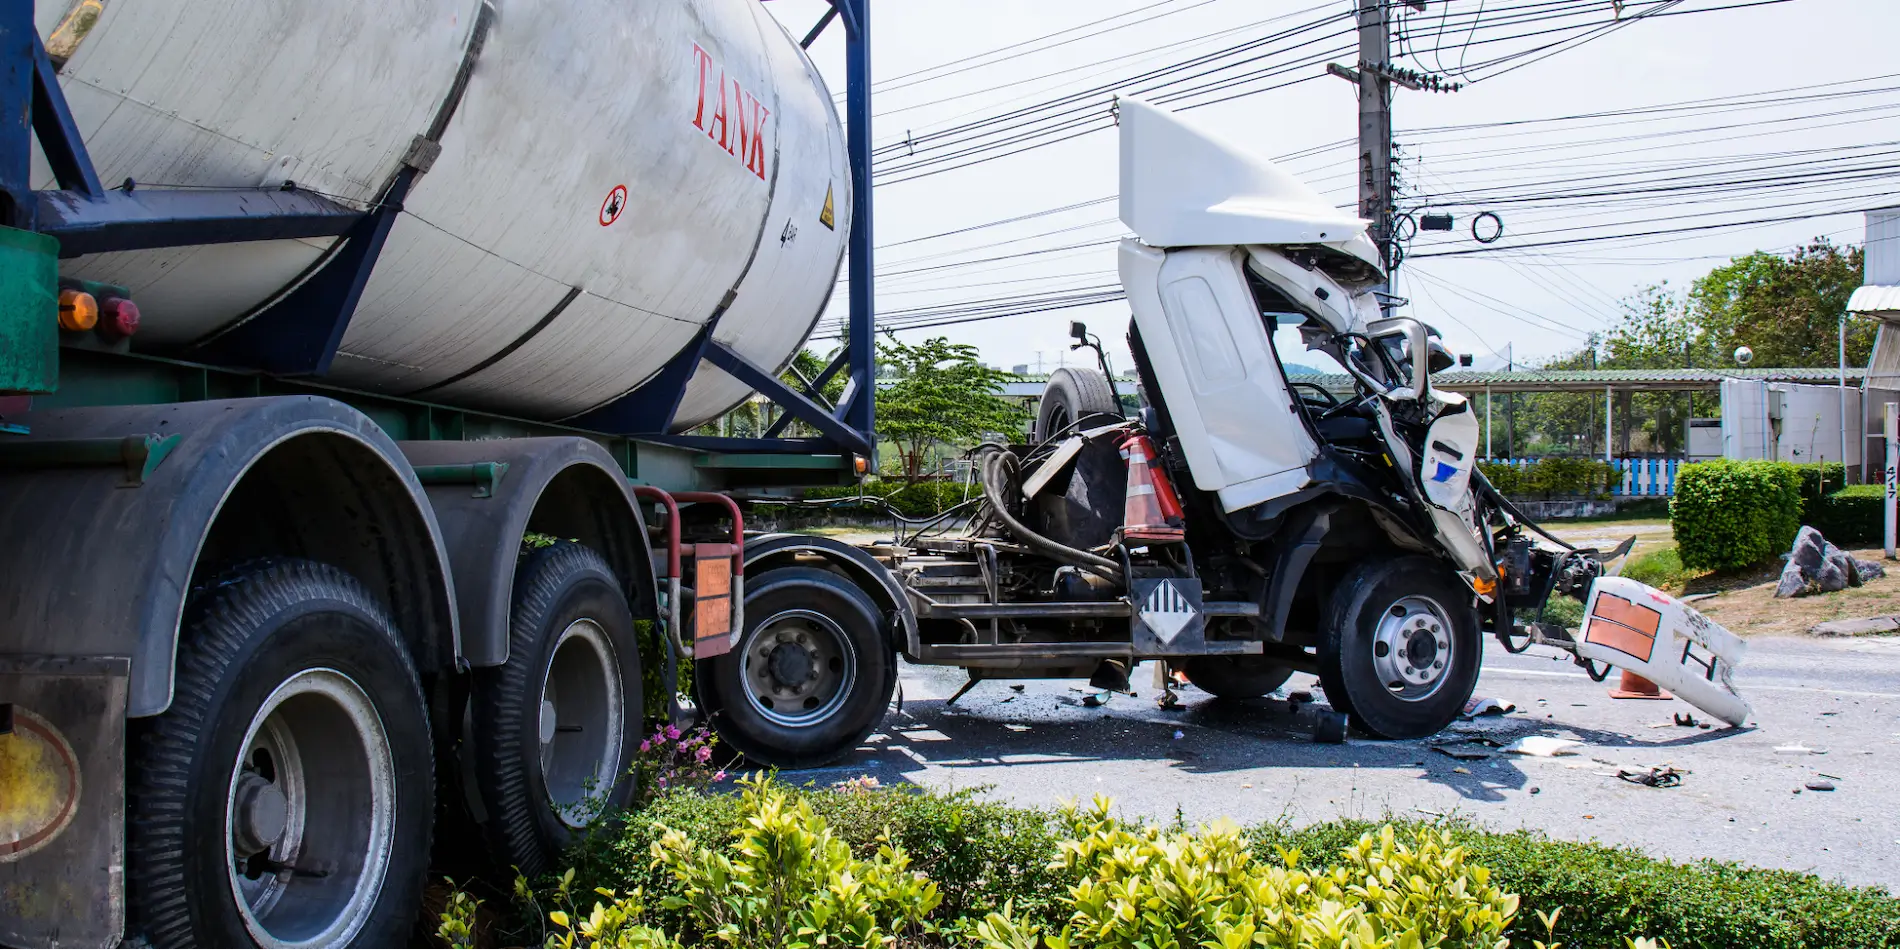 Injured in a truck accident? Our Henderson truck accident attorneys can get you the help you need